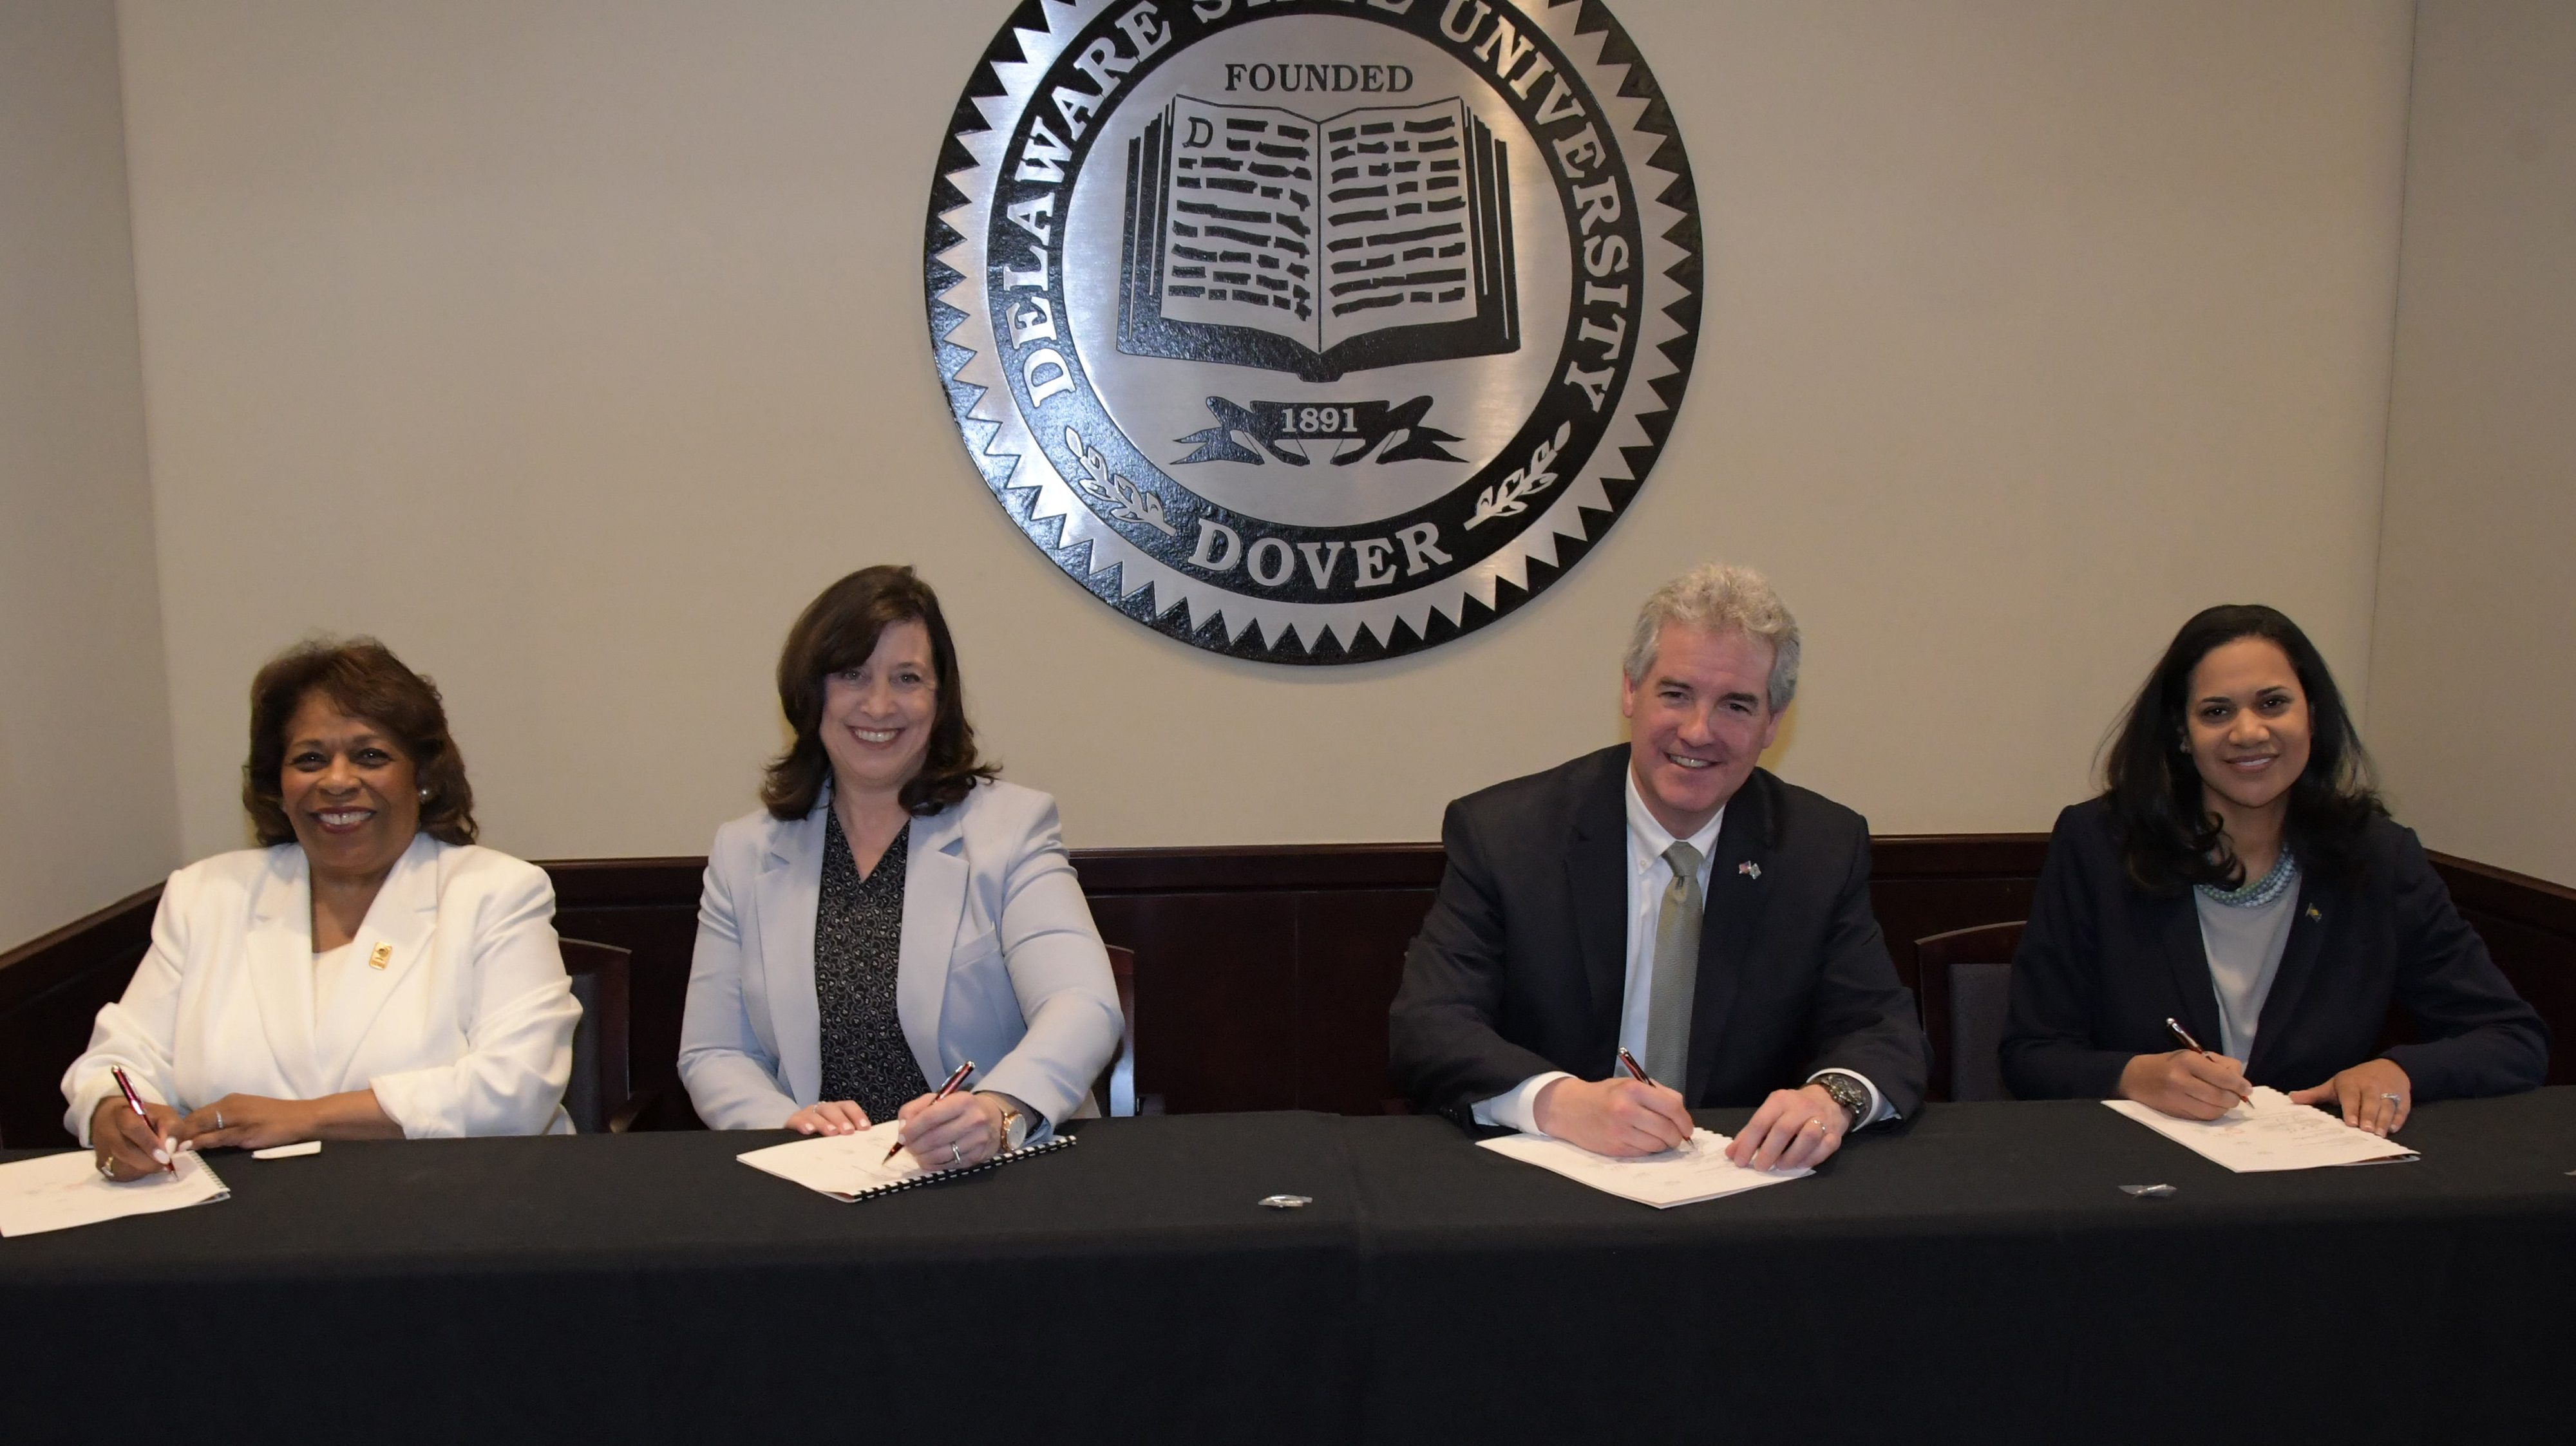 (L-r) University President Wilma Mishoe, EPA Deputy Director Cinday Caporale, DNREC Secretary Shawn M. Garvin and DHSS Secretary Kara Odom Walker sign a new agreement that will provide Delaware State University students internship and research opportunities as well as promote environmental stewardship at the institution.